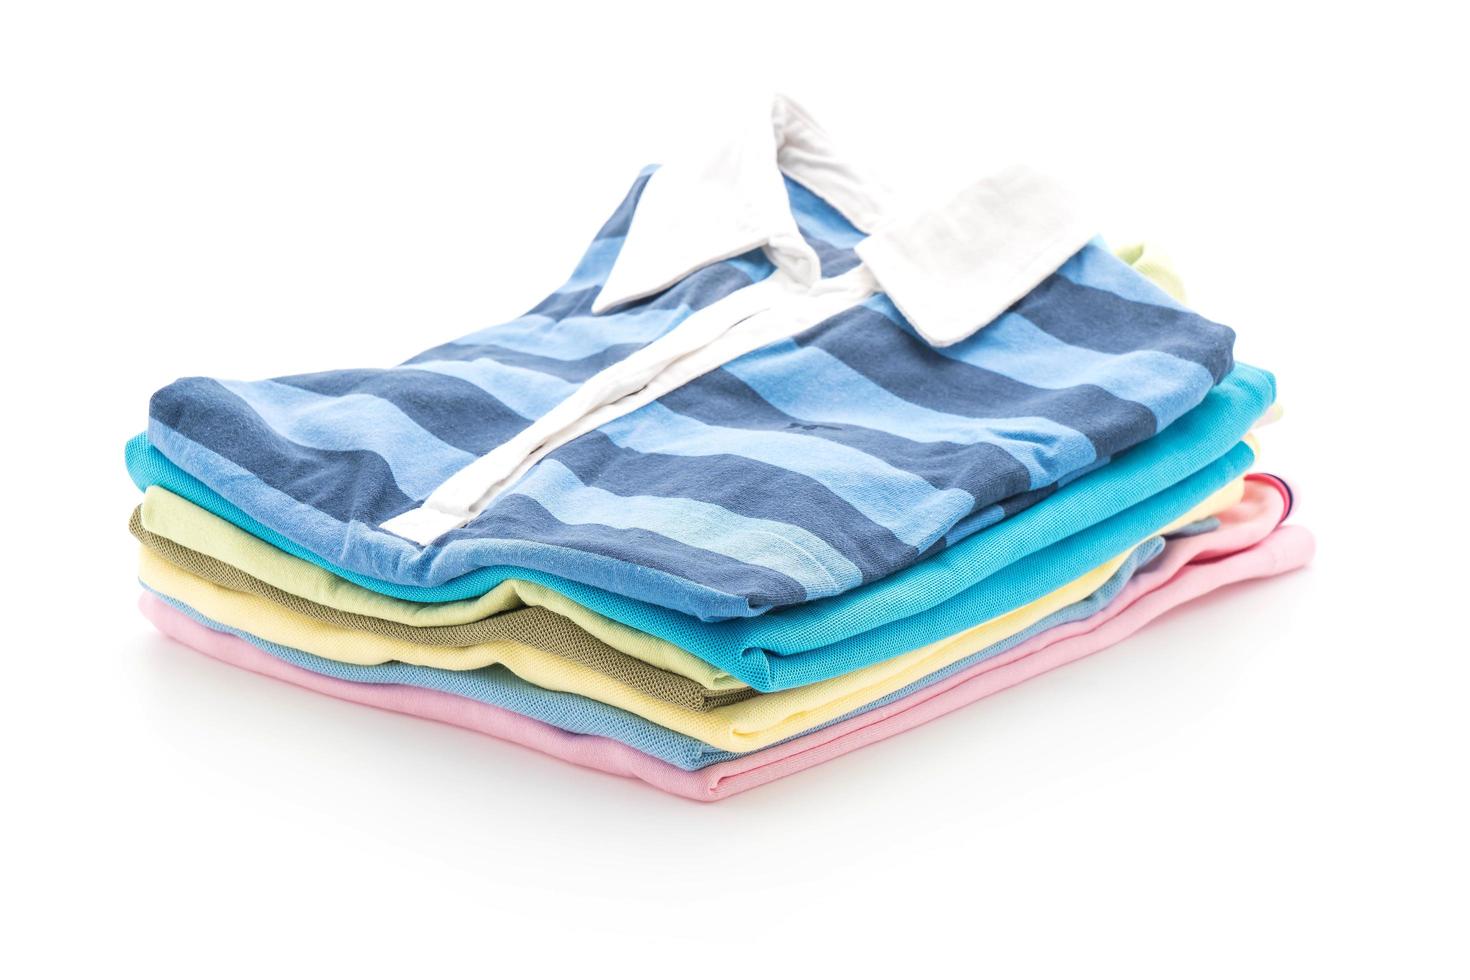 Stacks of clothing on white background 3189179 Stock Photo at Vecteezy